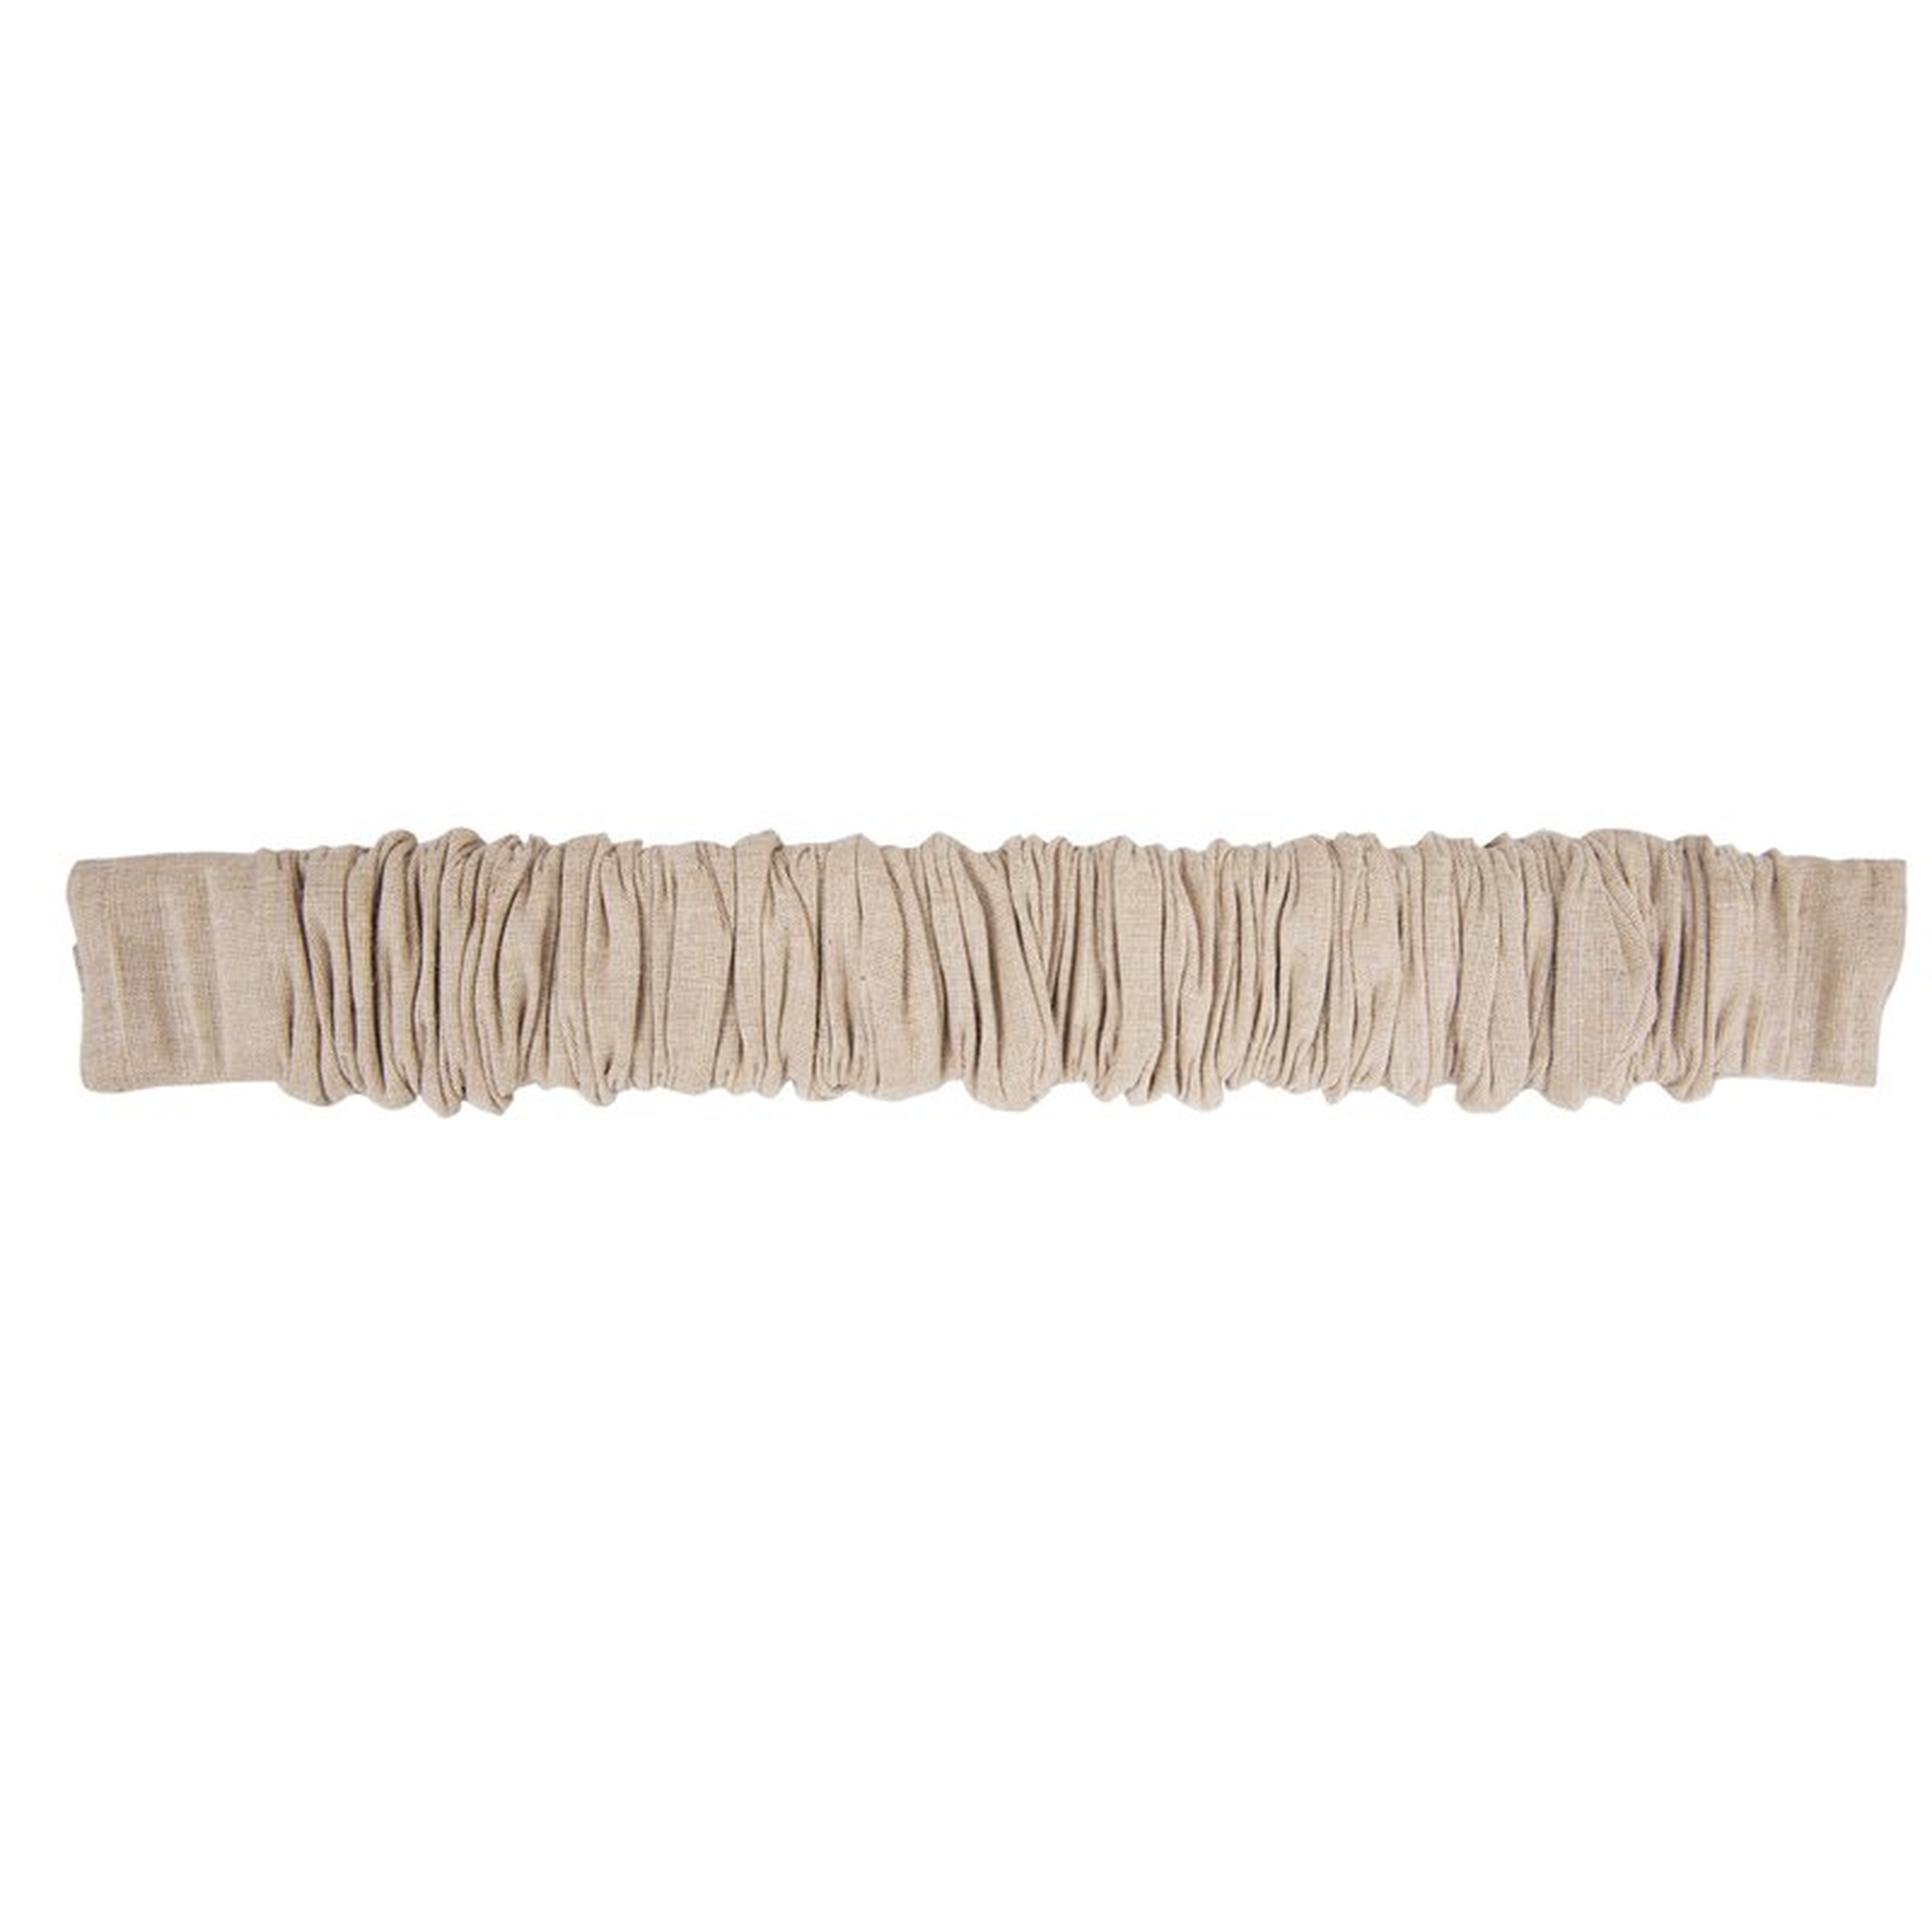 Fabric Chandelier Chain and Cord Cover - Beige - Wayfair